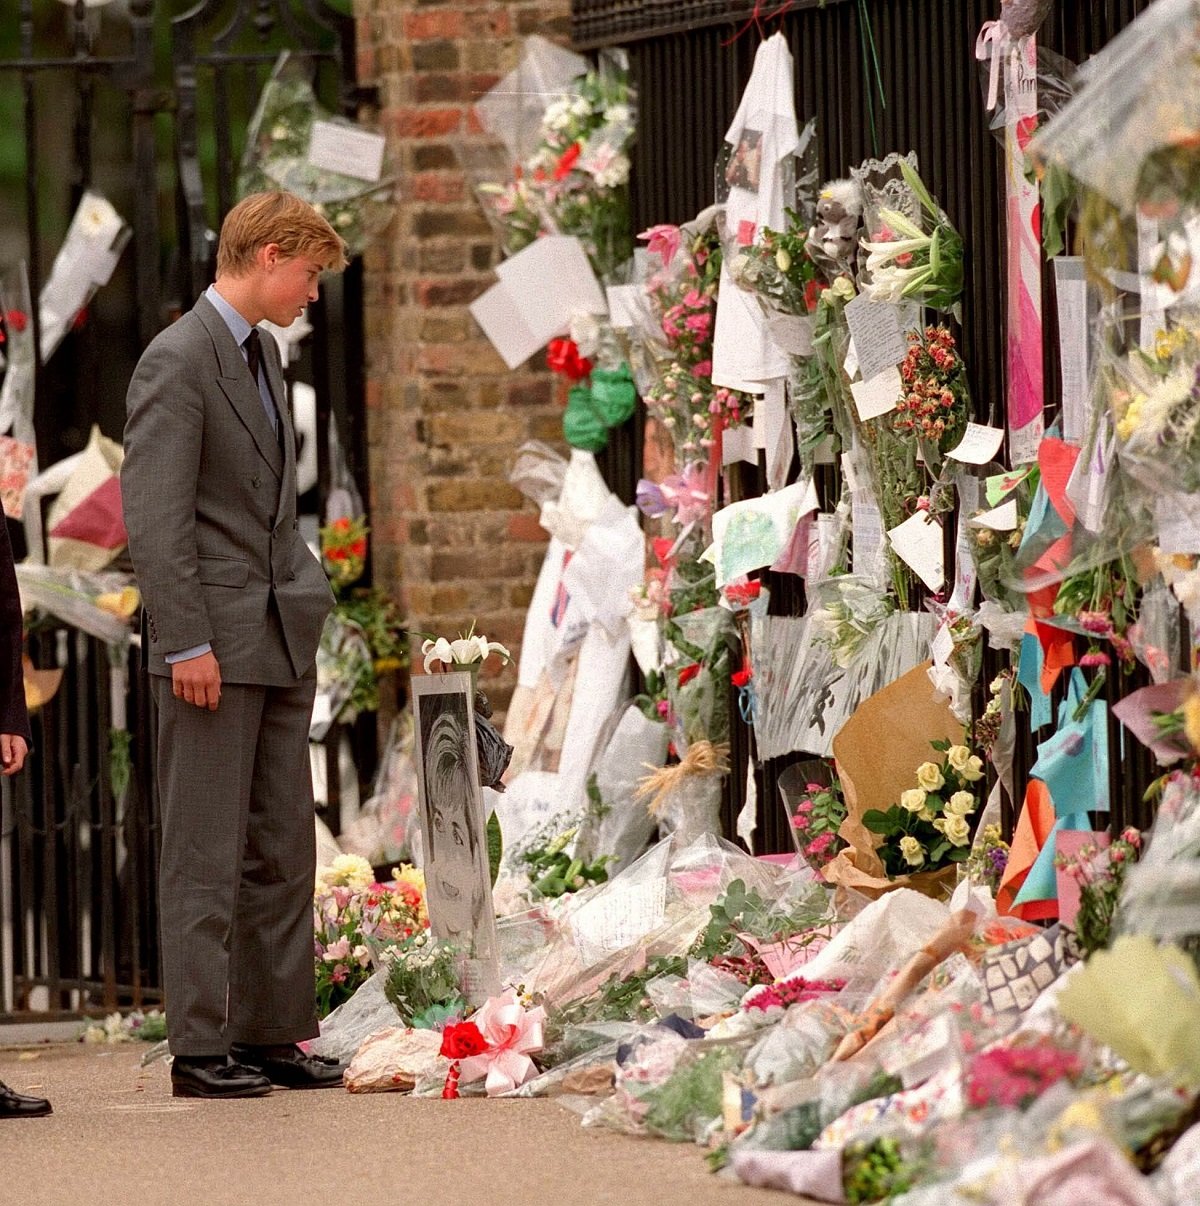 Prince William looking at floral tributes to Princess Diana outside Kensington Palace